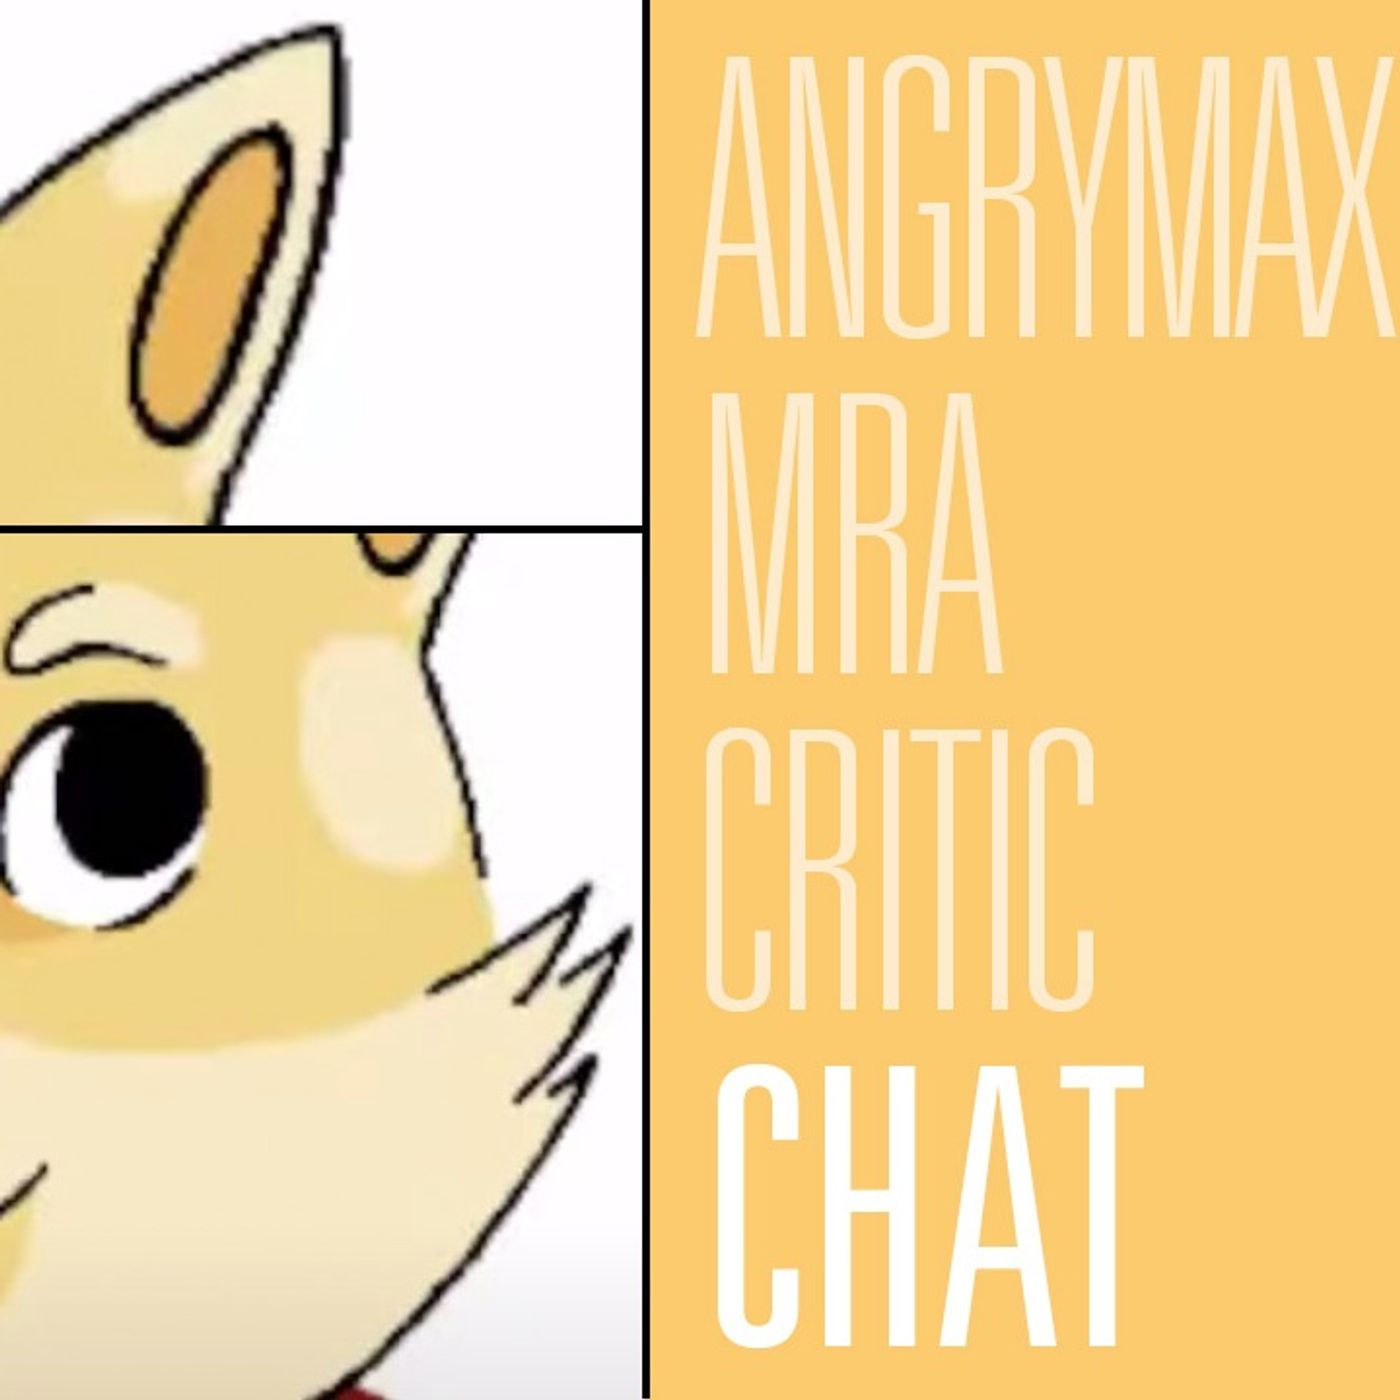 Discussing the Men's Movement With Critic AngryMax | Fireside Chat 183